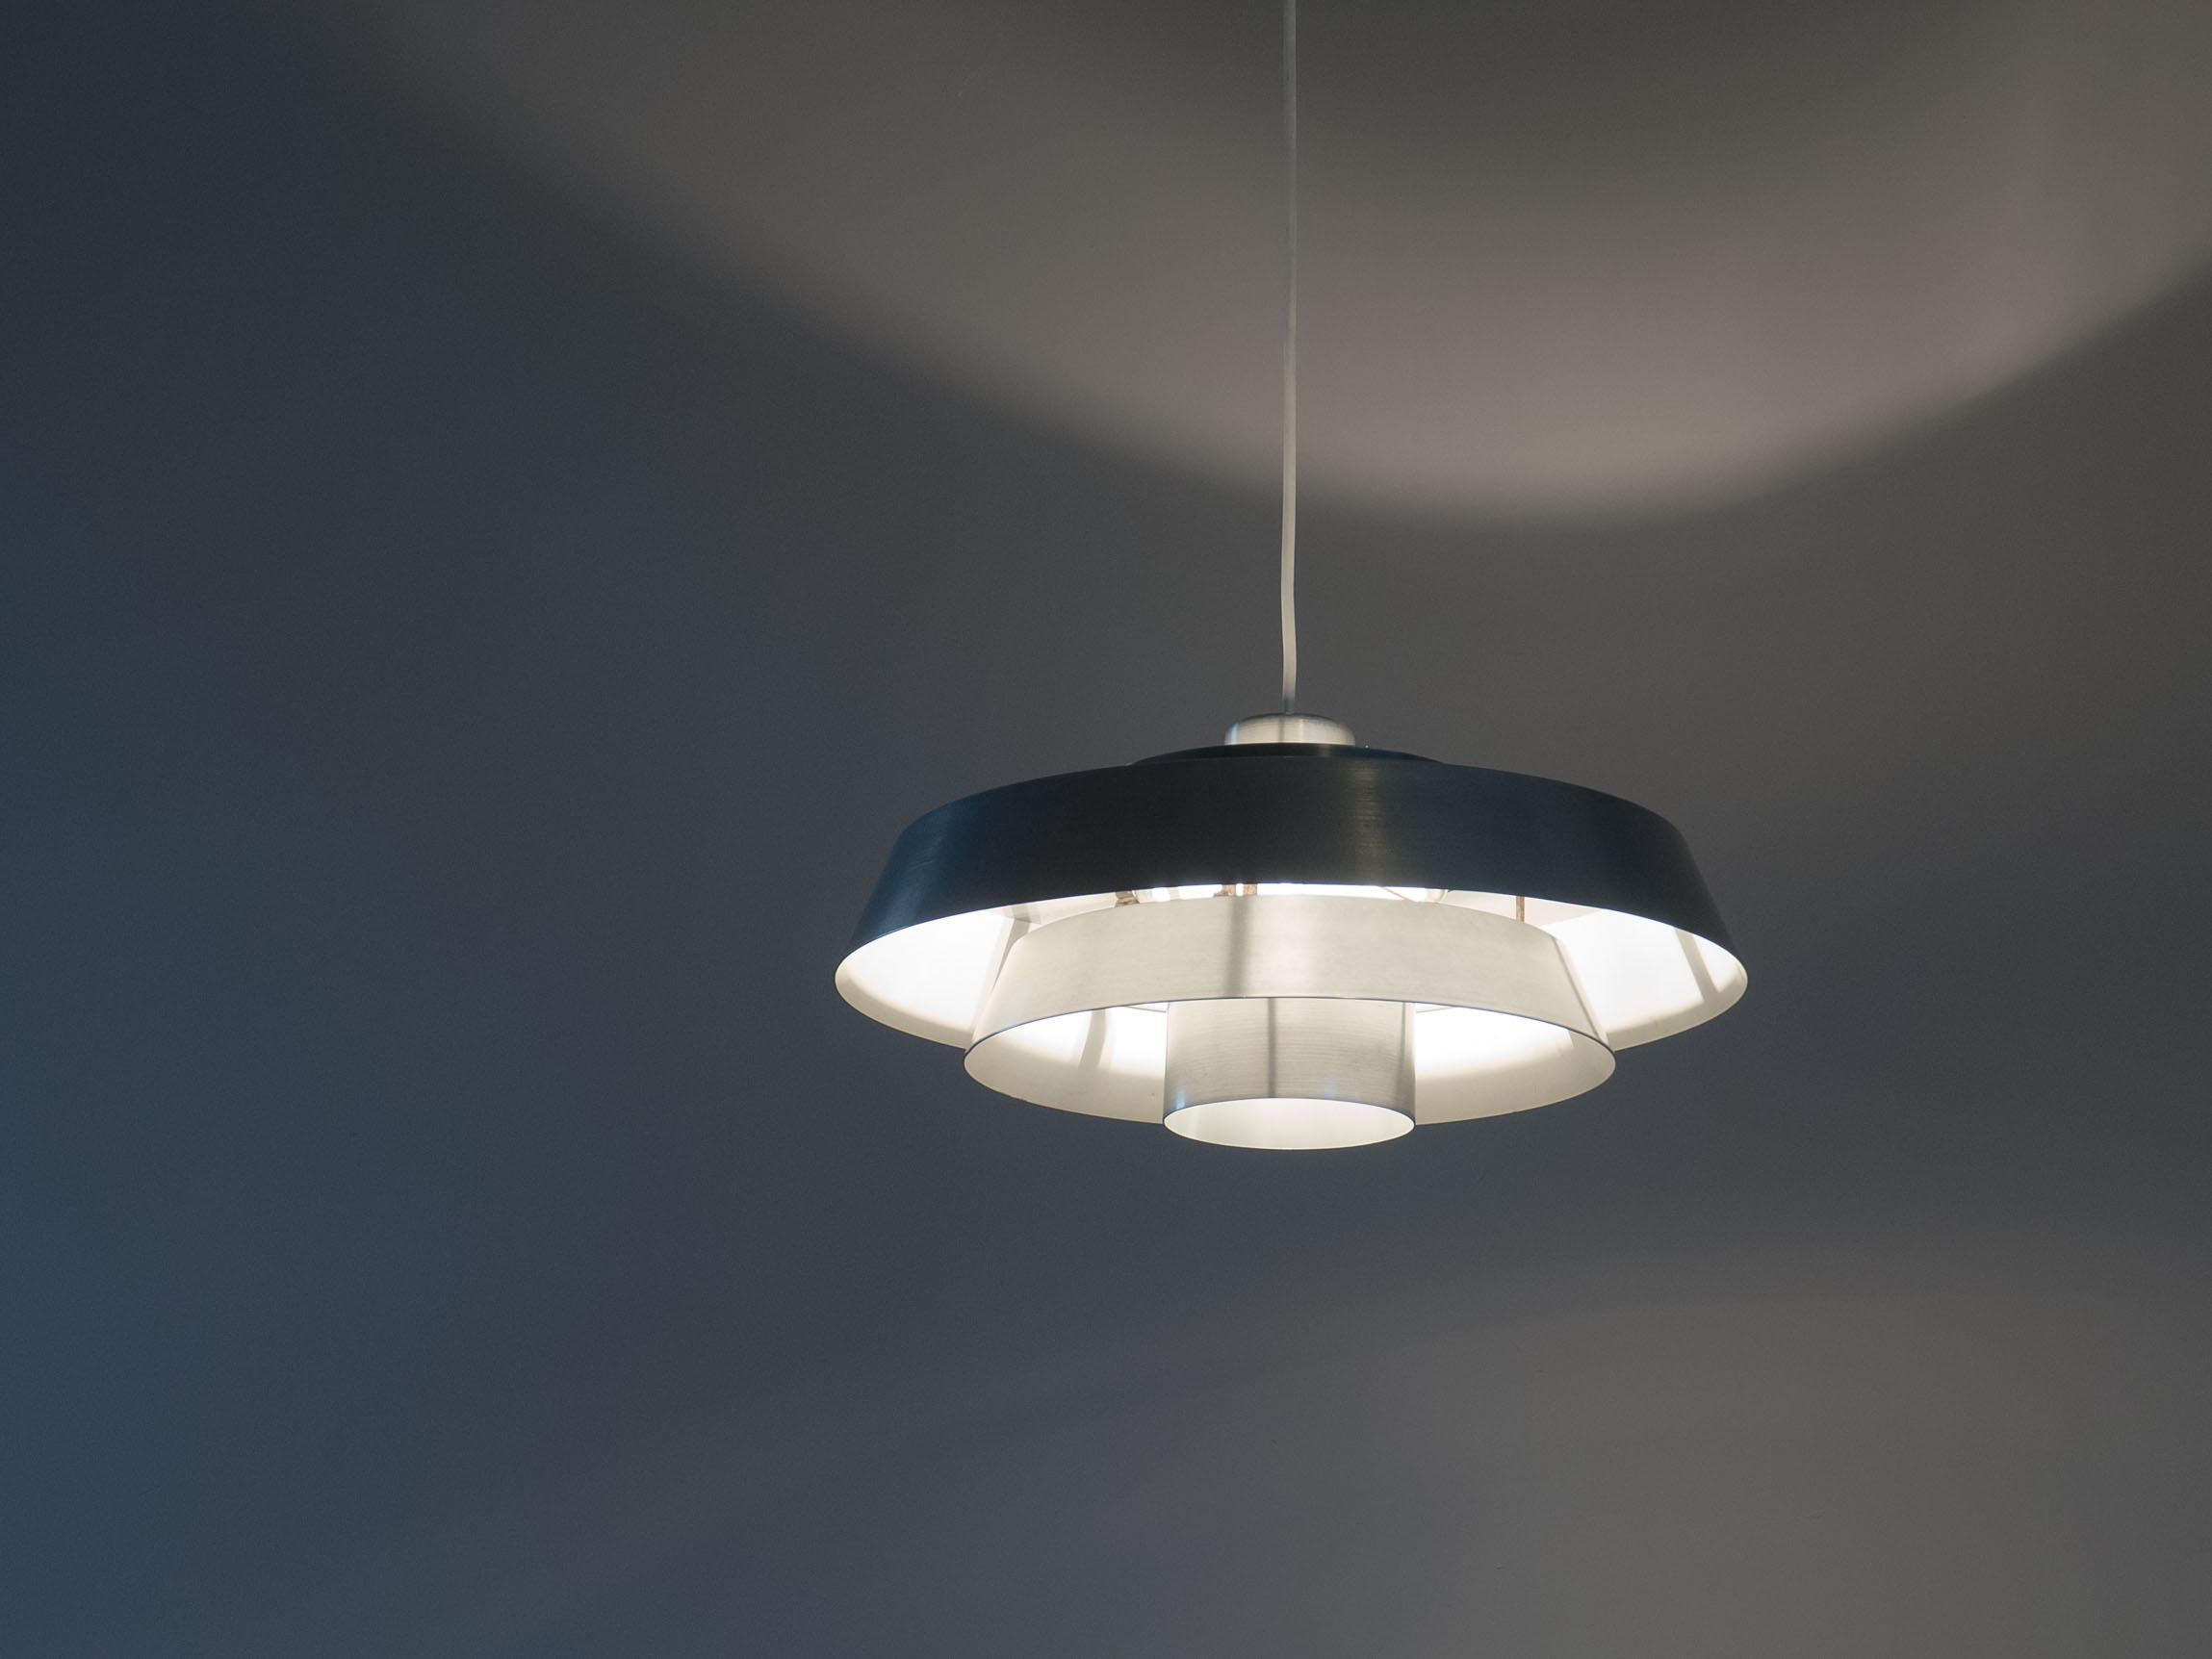 Vintage pendant light called ‘Nova’. Designed by Jo Hammerborg for Fog & Mørup, Denmark.

This vintage pendant is a great example of Danish design lights. The aluminum rings are shaped and sized so that the light falls through them in a stunning